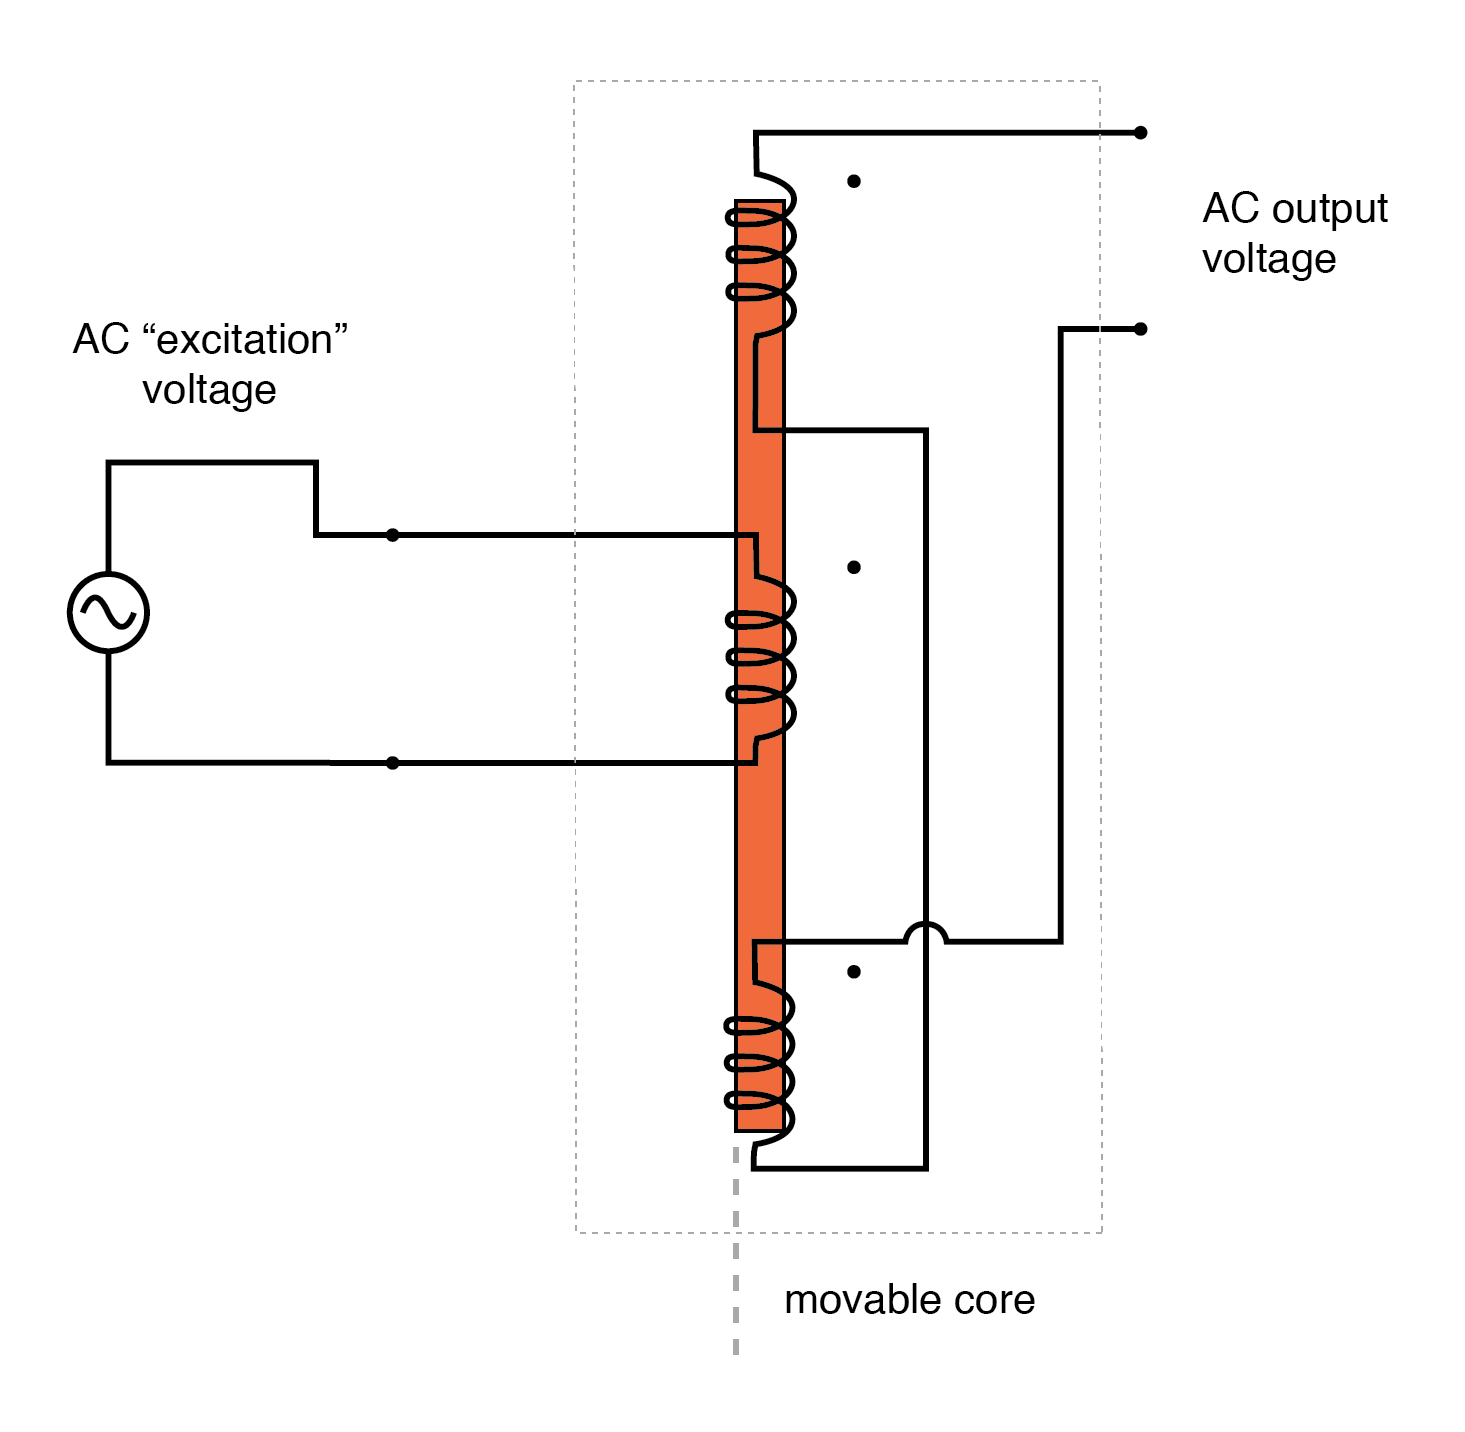 AC output of linear variable differential transformer (LVDT) indicates core position.